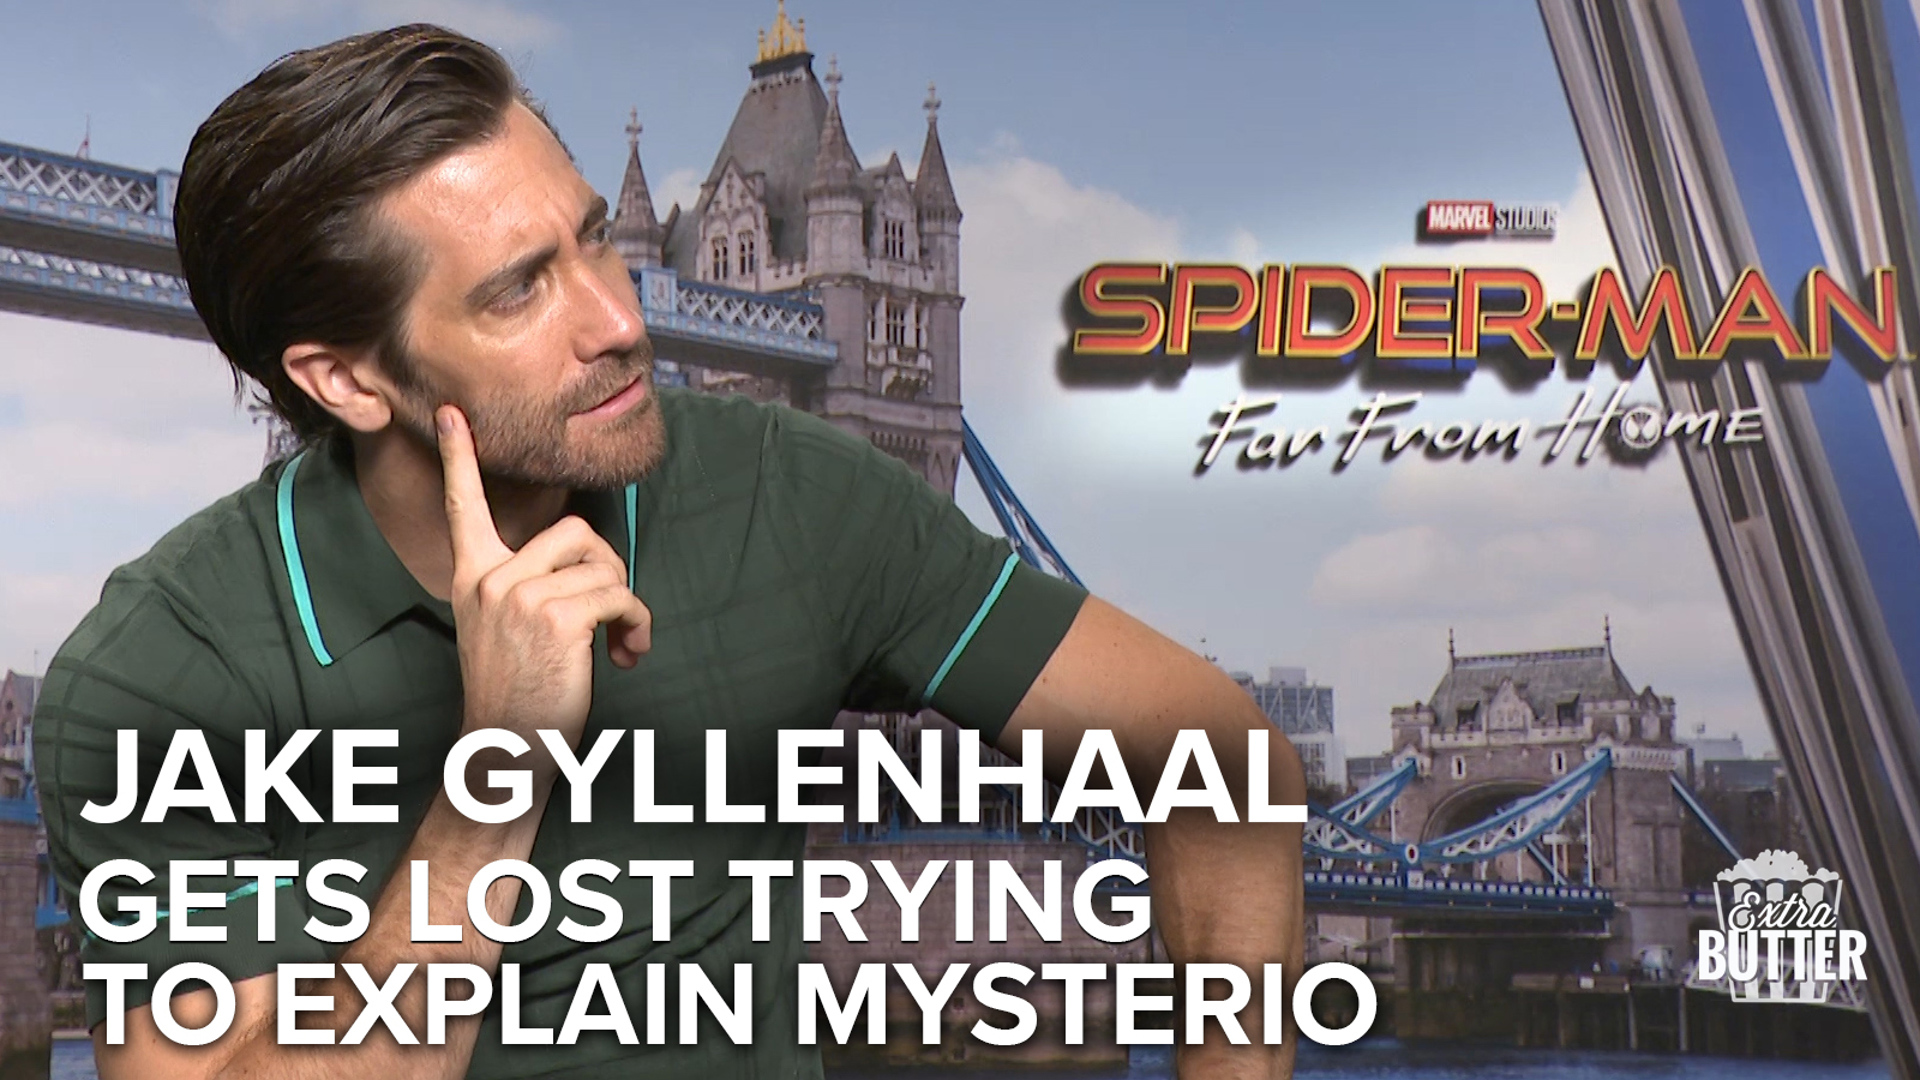 Jake Gyllenhaal gets lost while trying to explain Mysterio and the time continuum in 'Spider-man: Far From Home.' Jake also talks about joining Marvel for the first time.